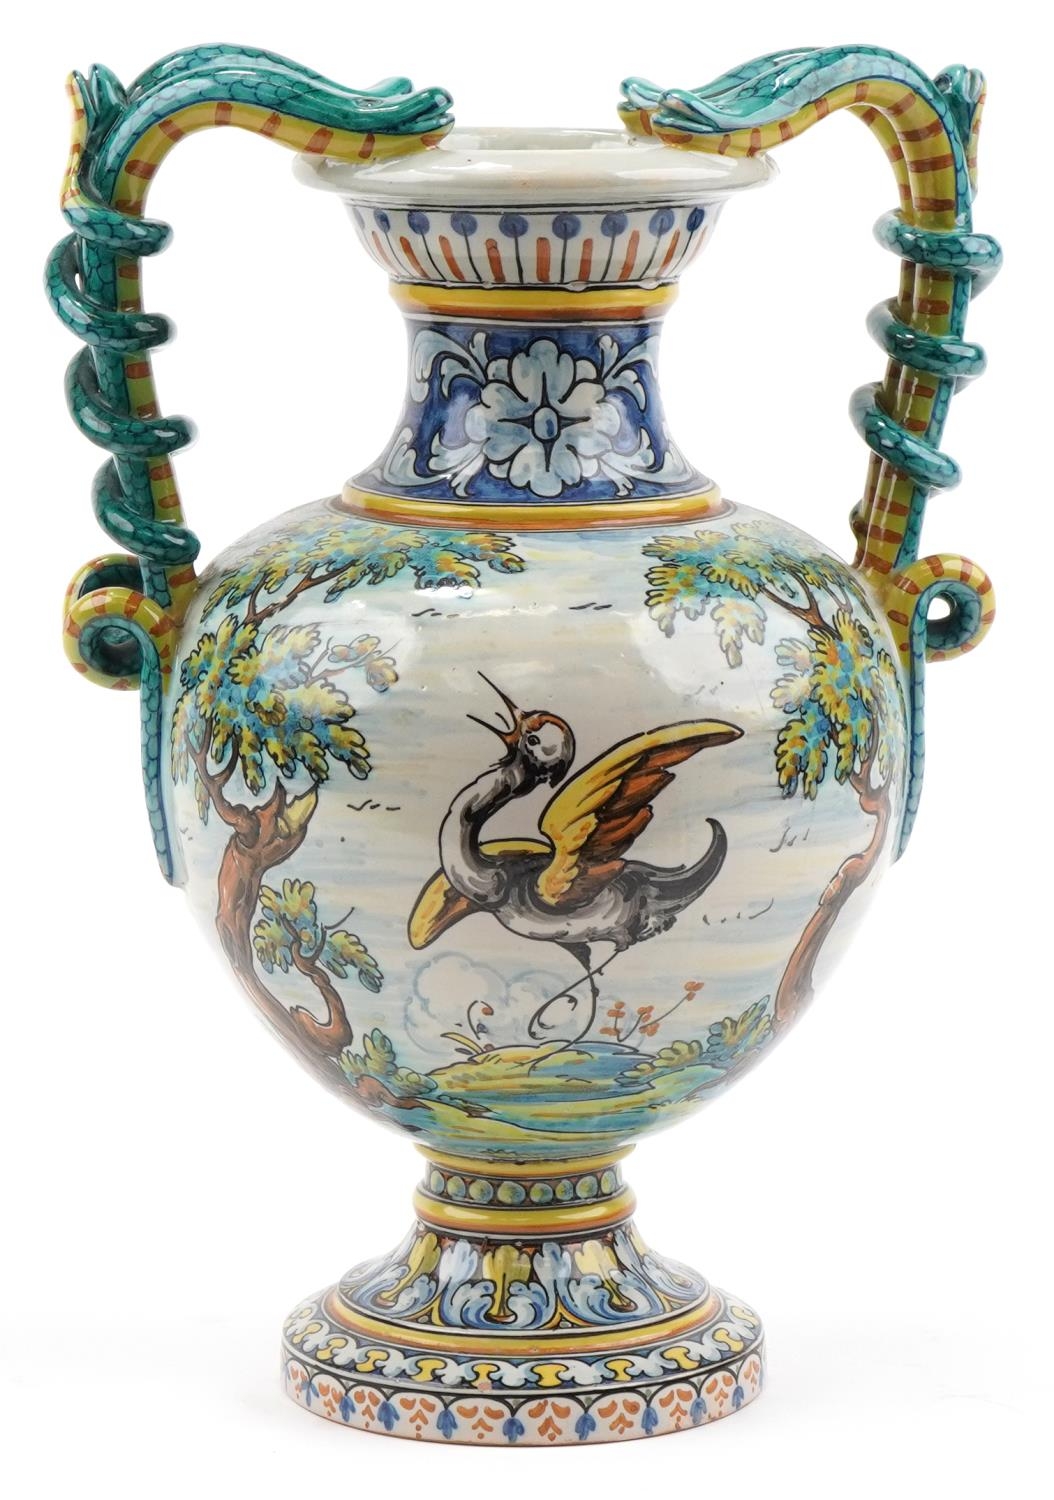 Talevera, large Spanish Maiolica vase with twin serpent handles hand painted with a mythical bird in - Image 3 of 5